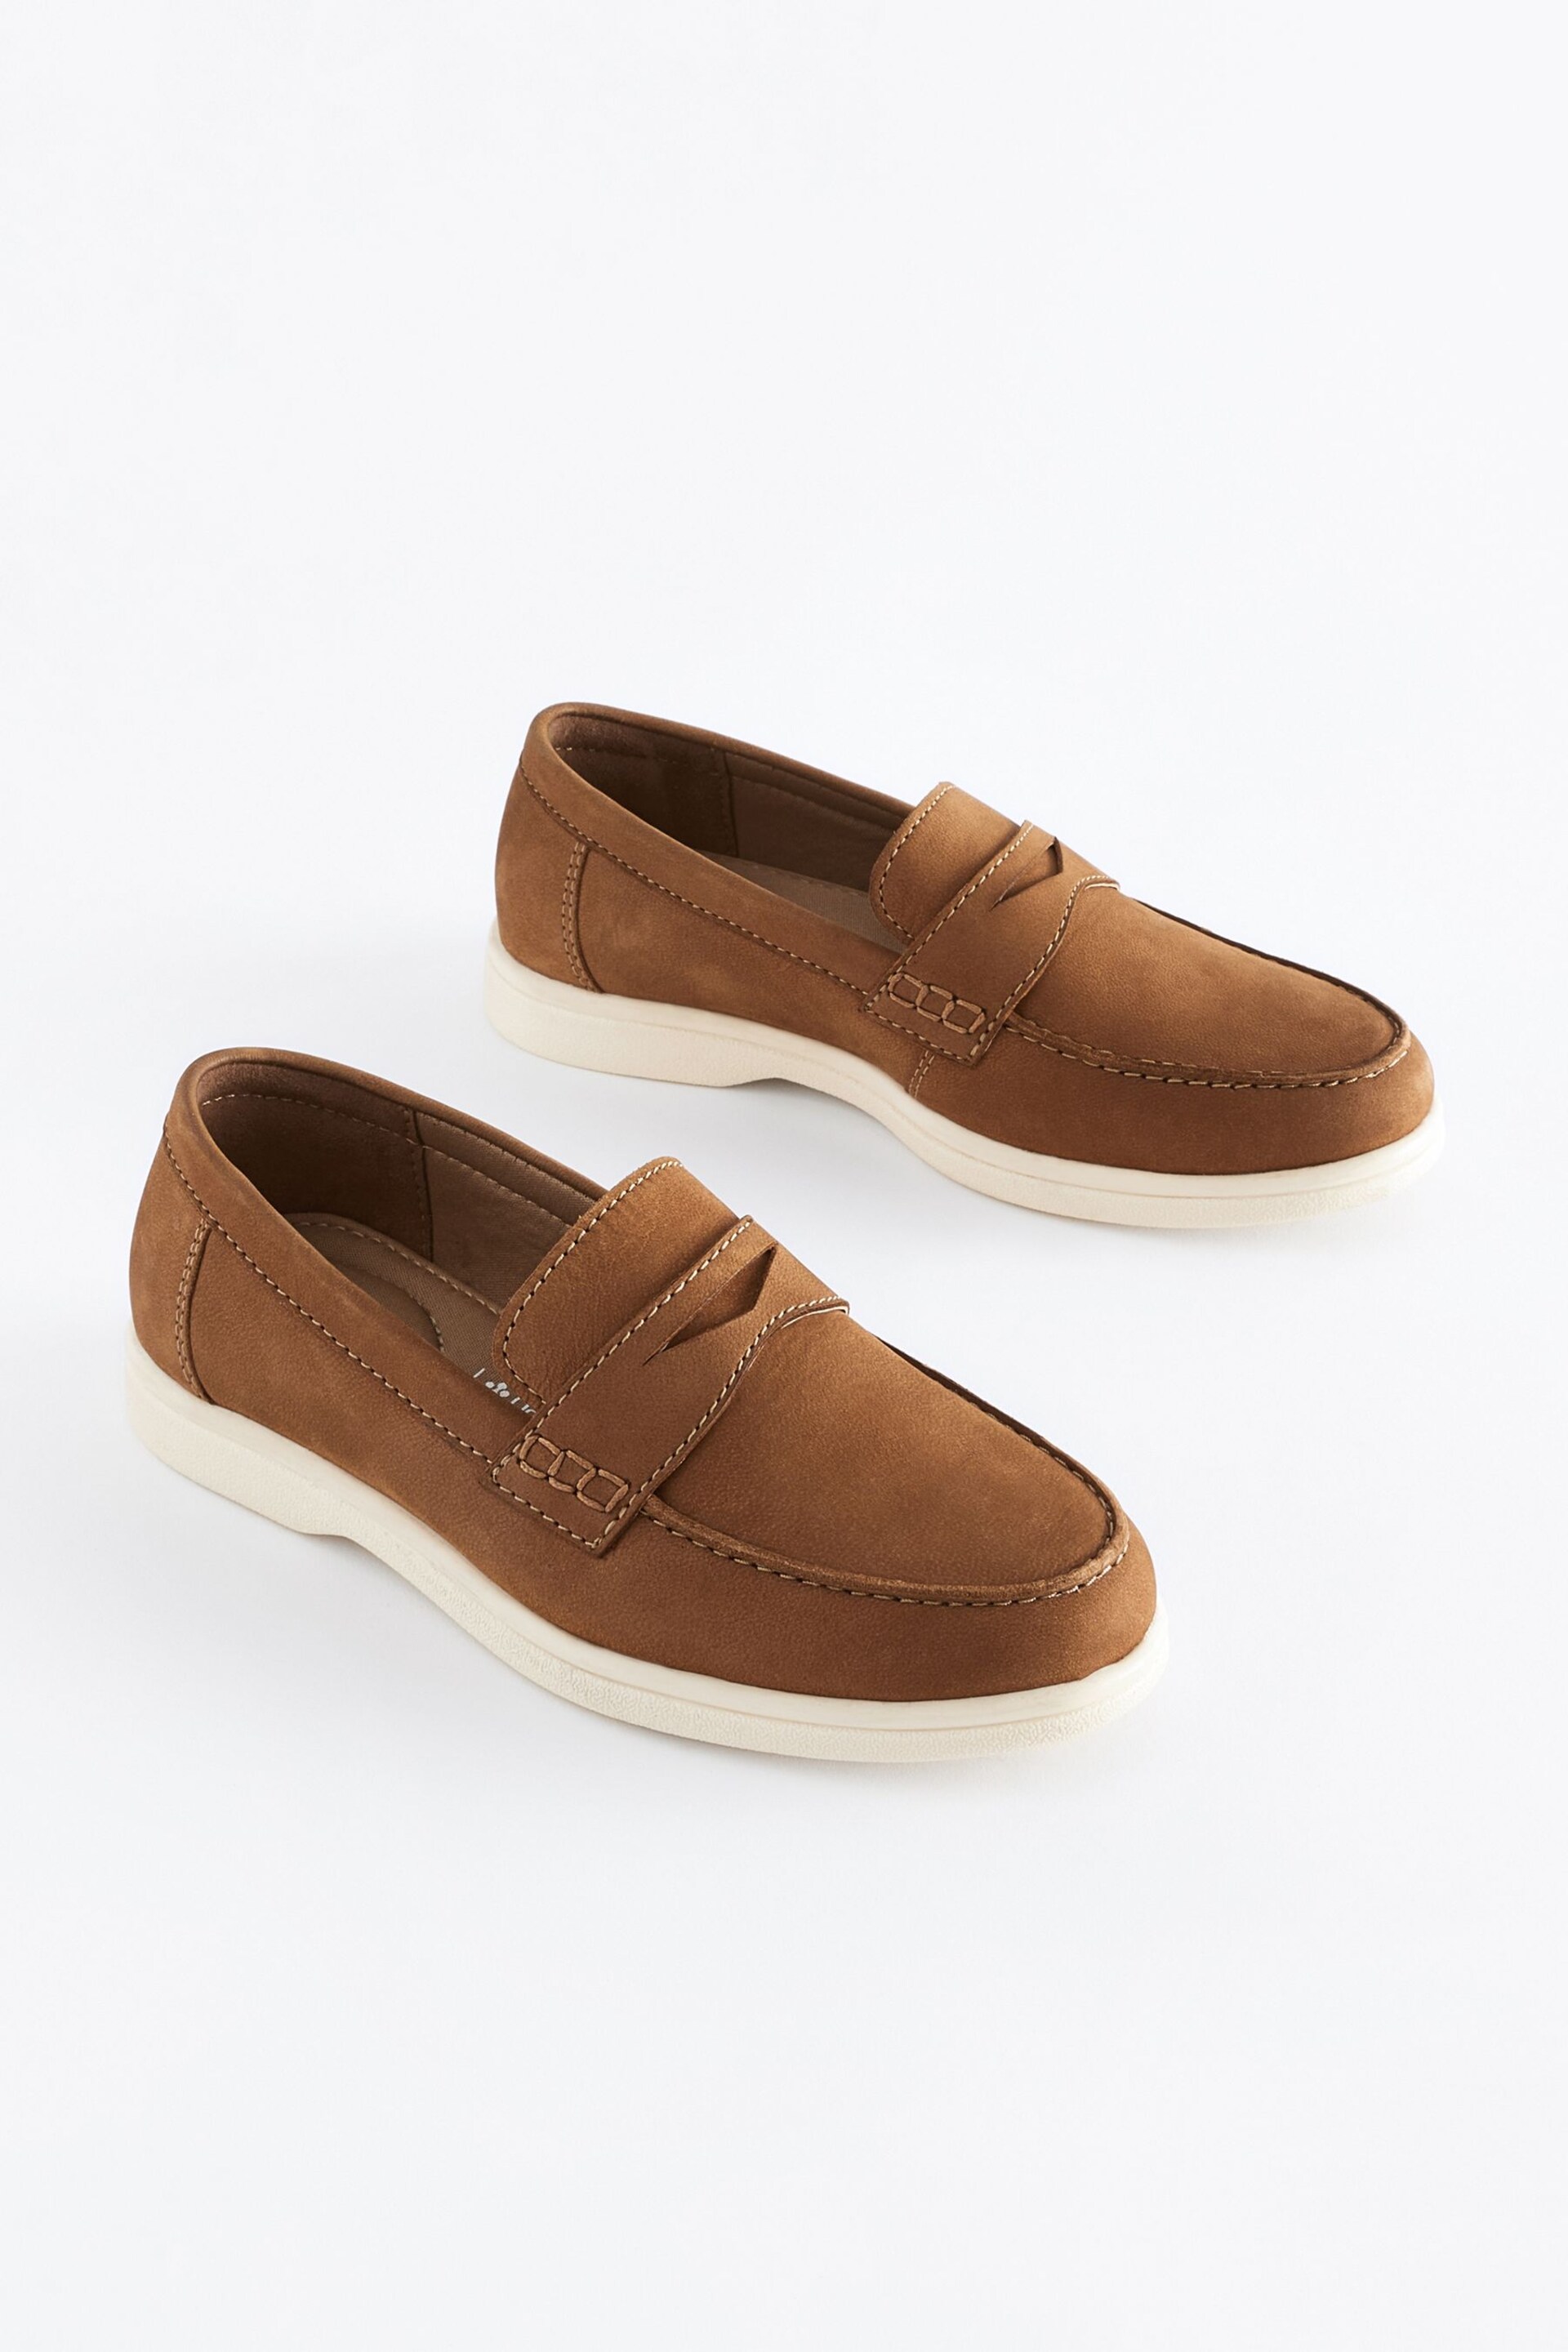 Tan Brown Contrast Sole Leather Penny Loafers - Image 1 of 6